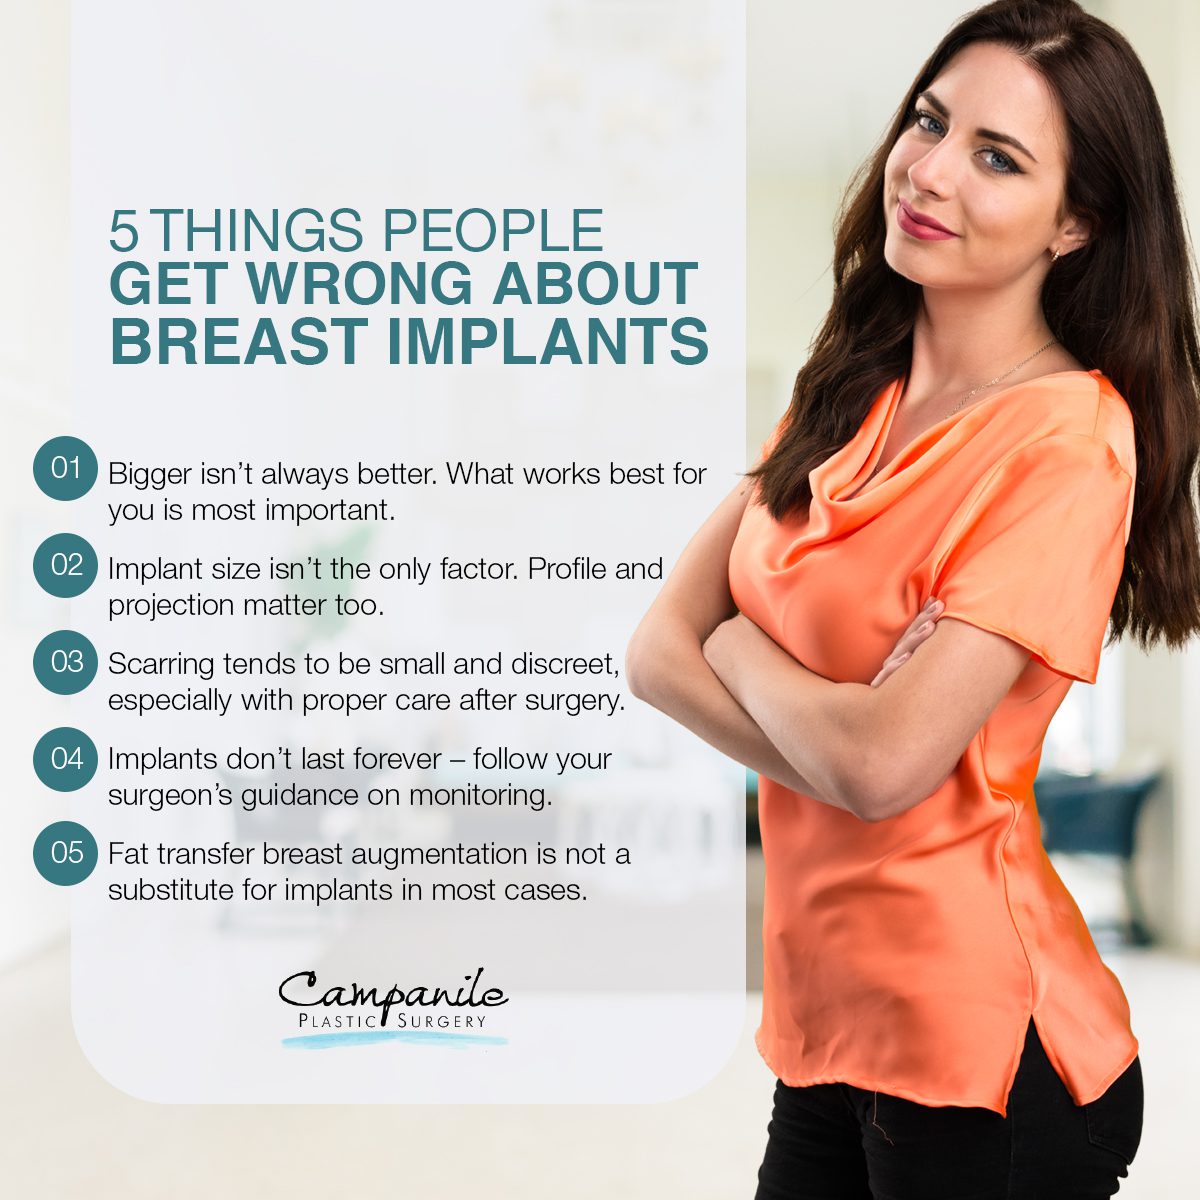 5 Things People Get Wrong about Breast Implants